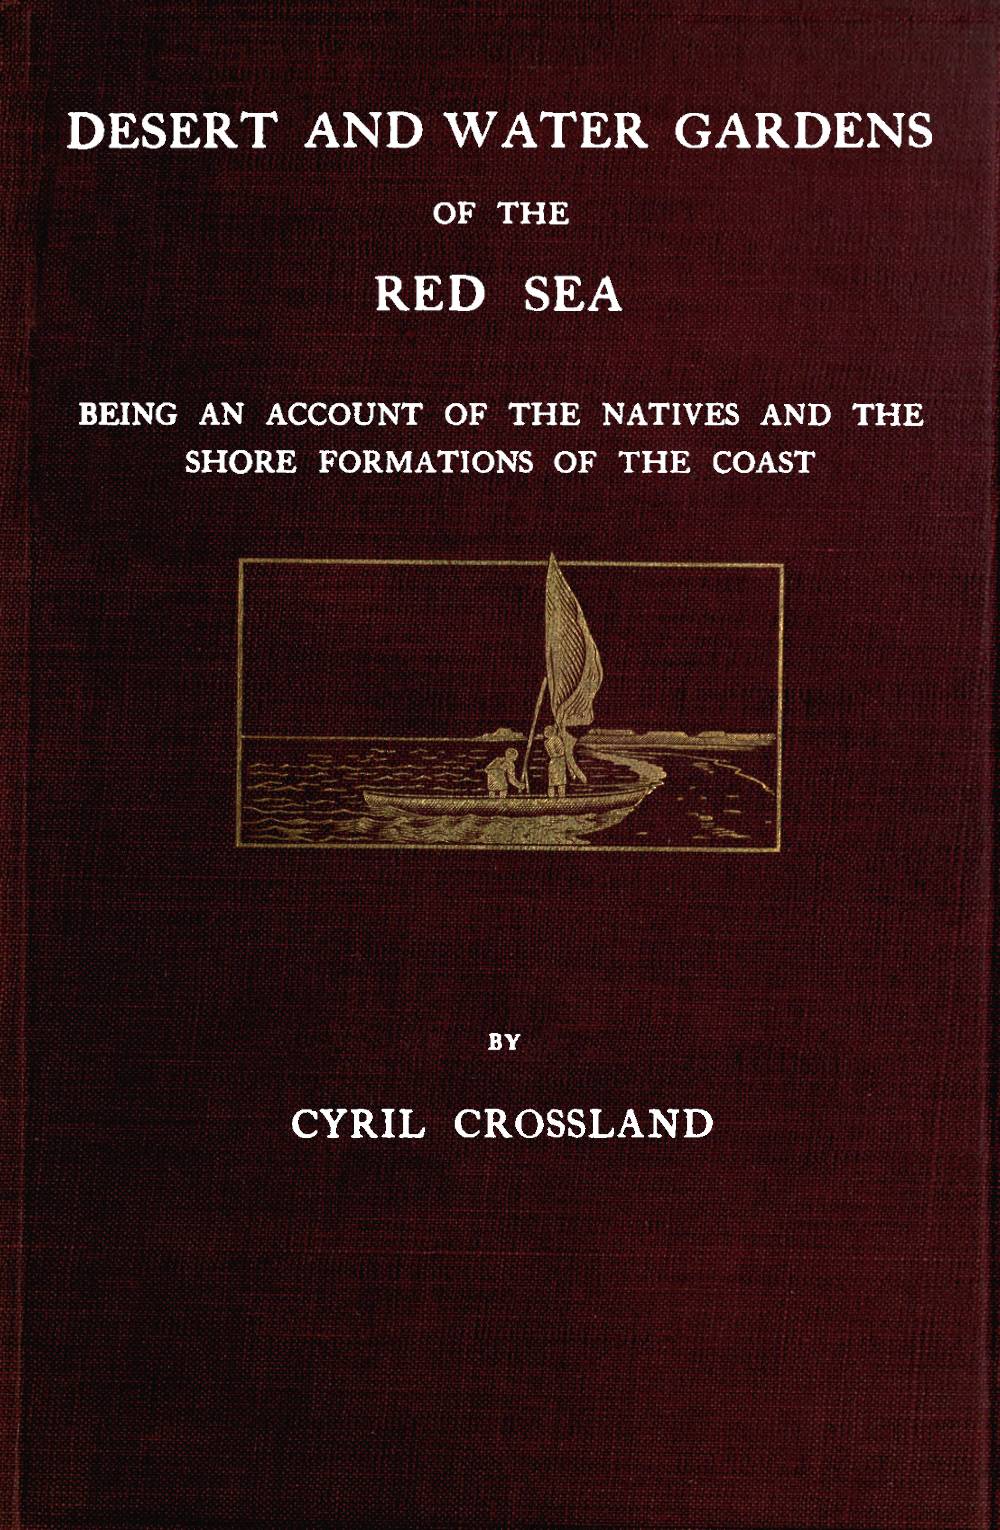 The Project Gutenberg Ebook of Desert and water gardens of the Red Sea by  Cyril Crossland